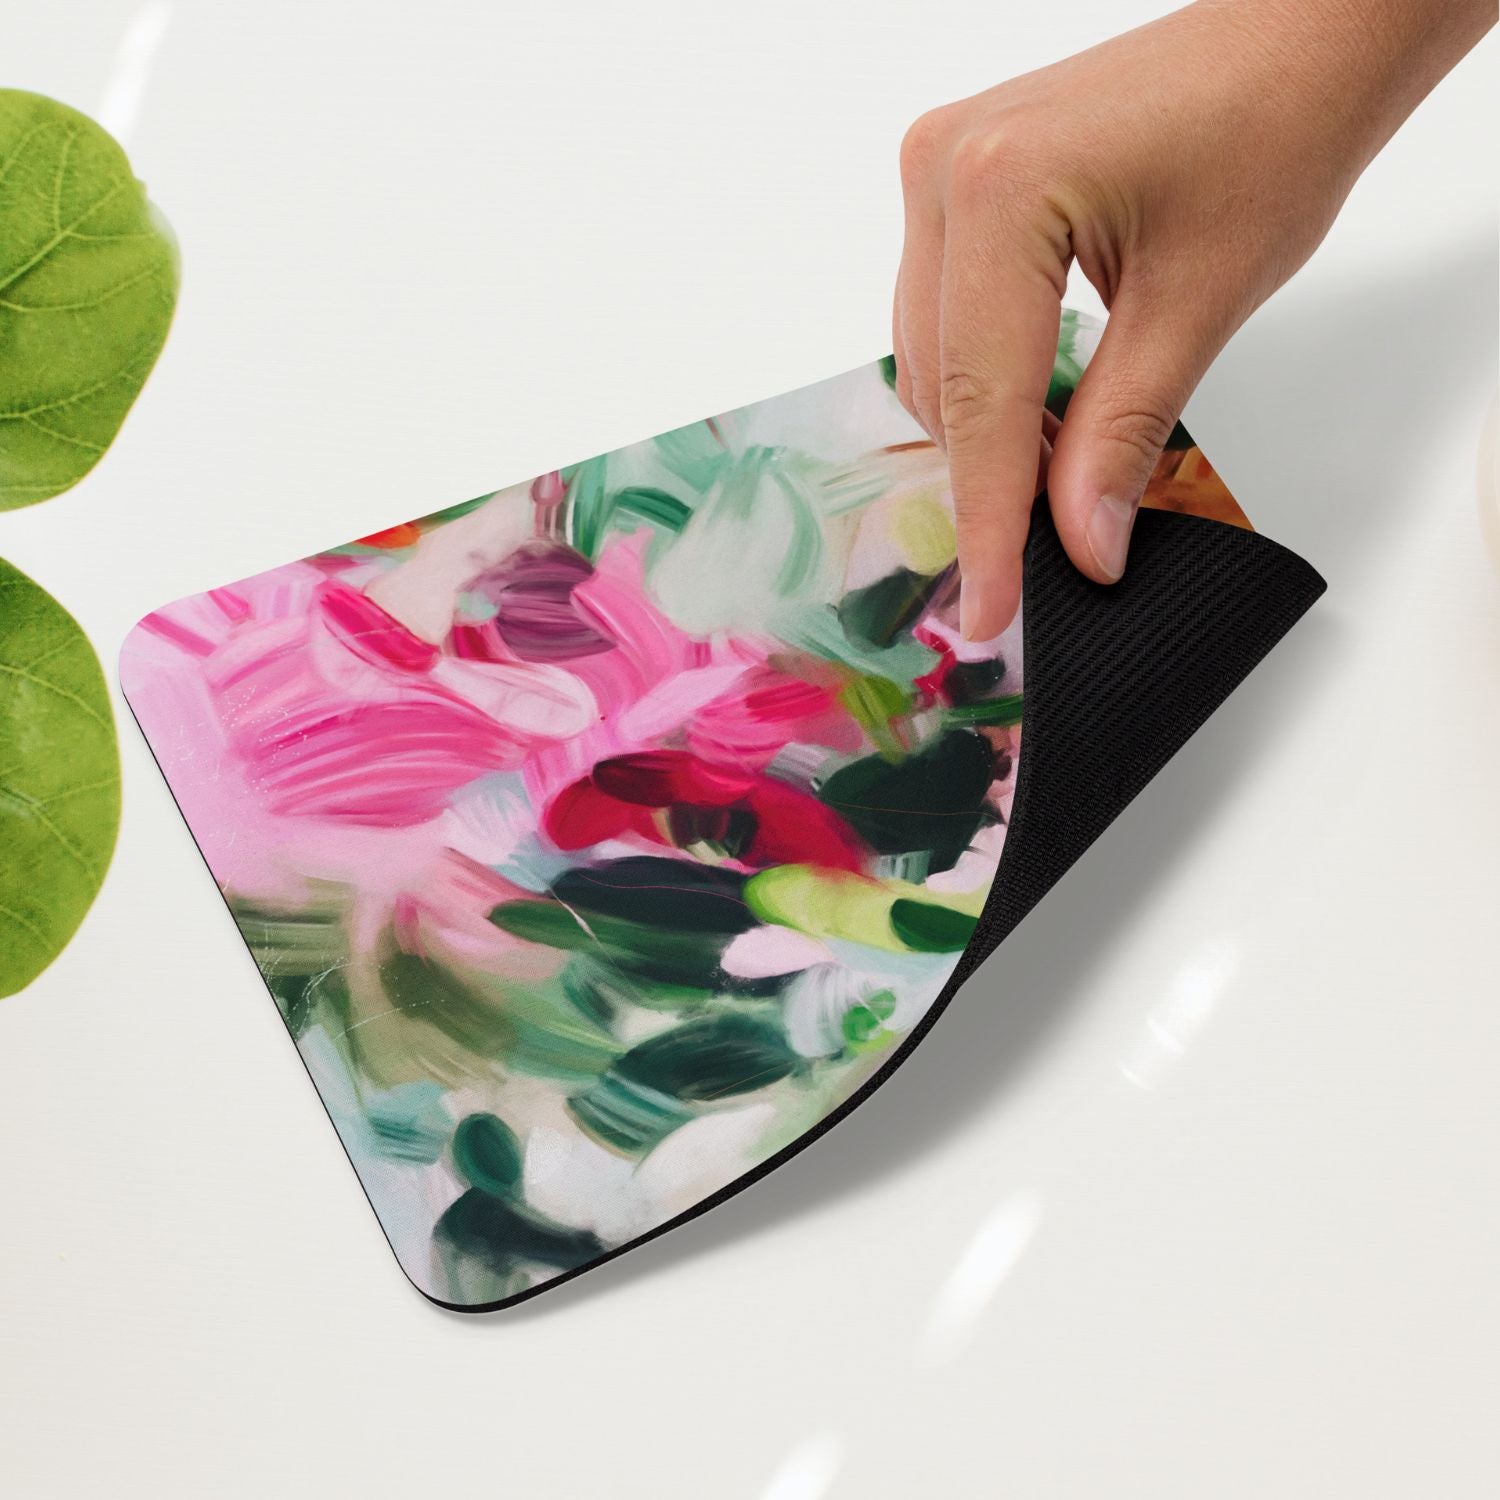 Bloom, colorful mouse pad for styling your office desk. Featuring artwork by Parima Studio. Home office styling accessories, cubicle styling accessories.